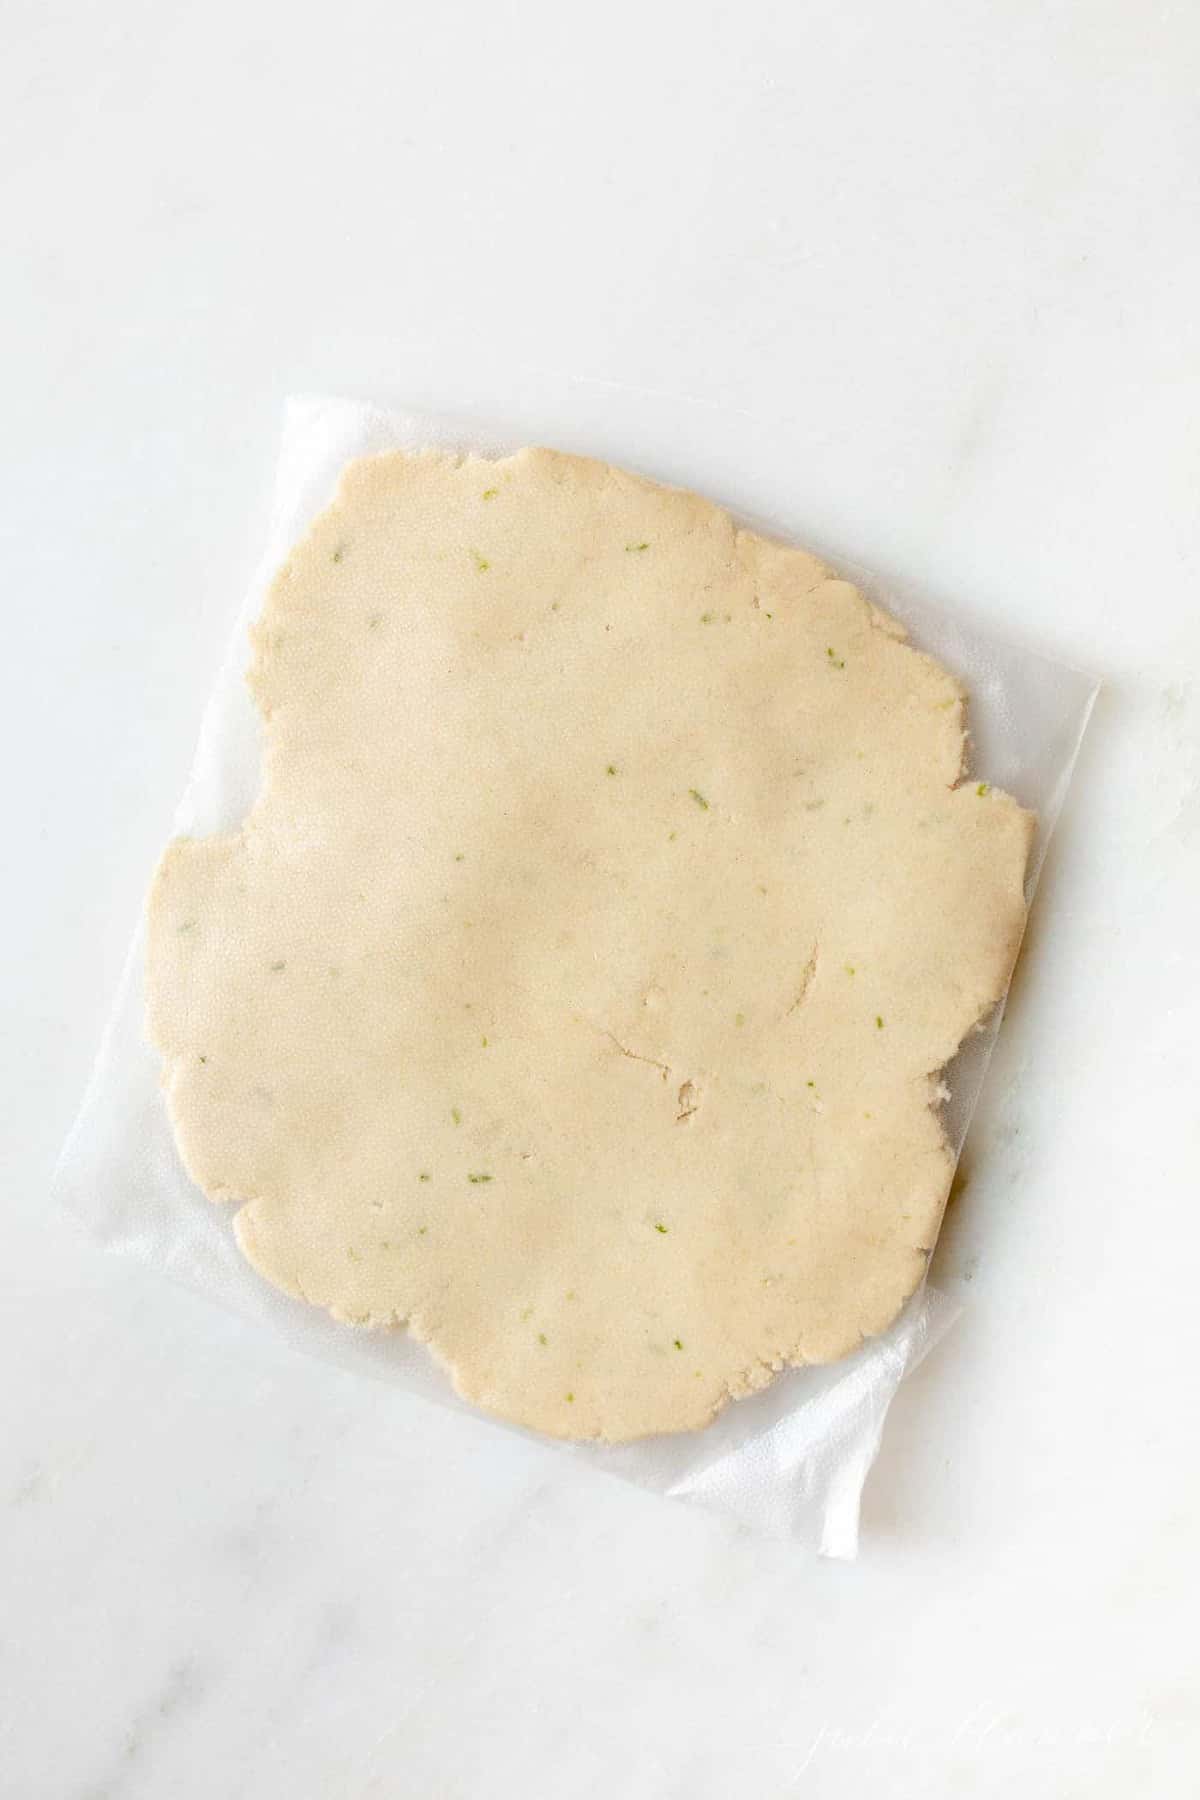 A flat disk of lime cookie dough.